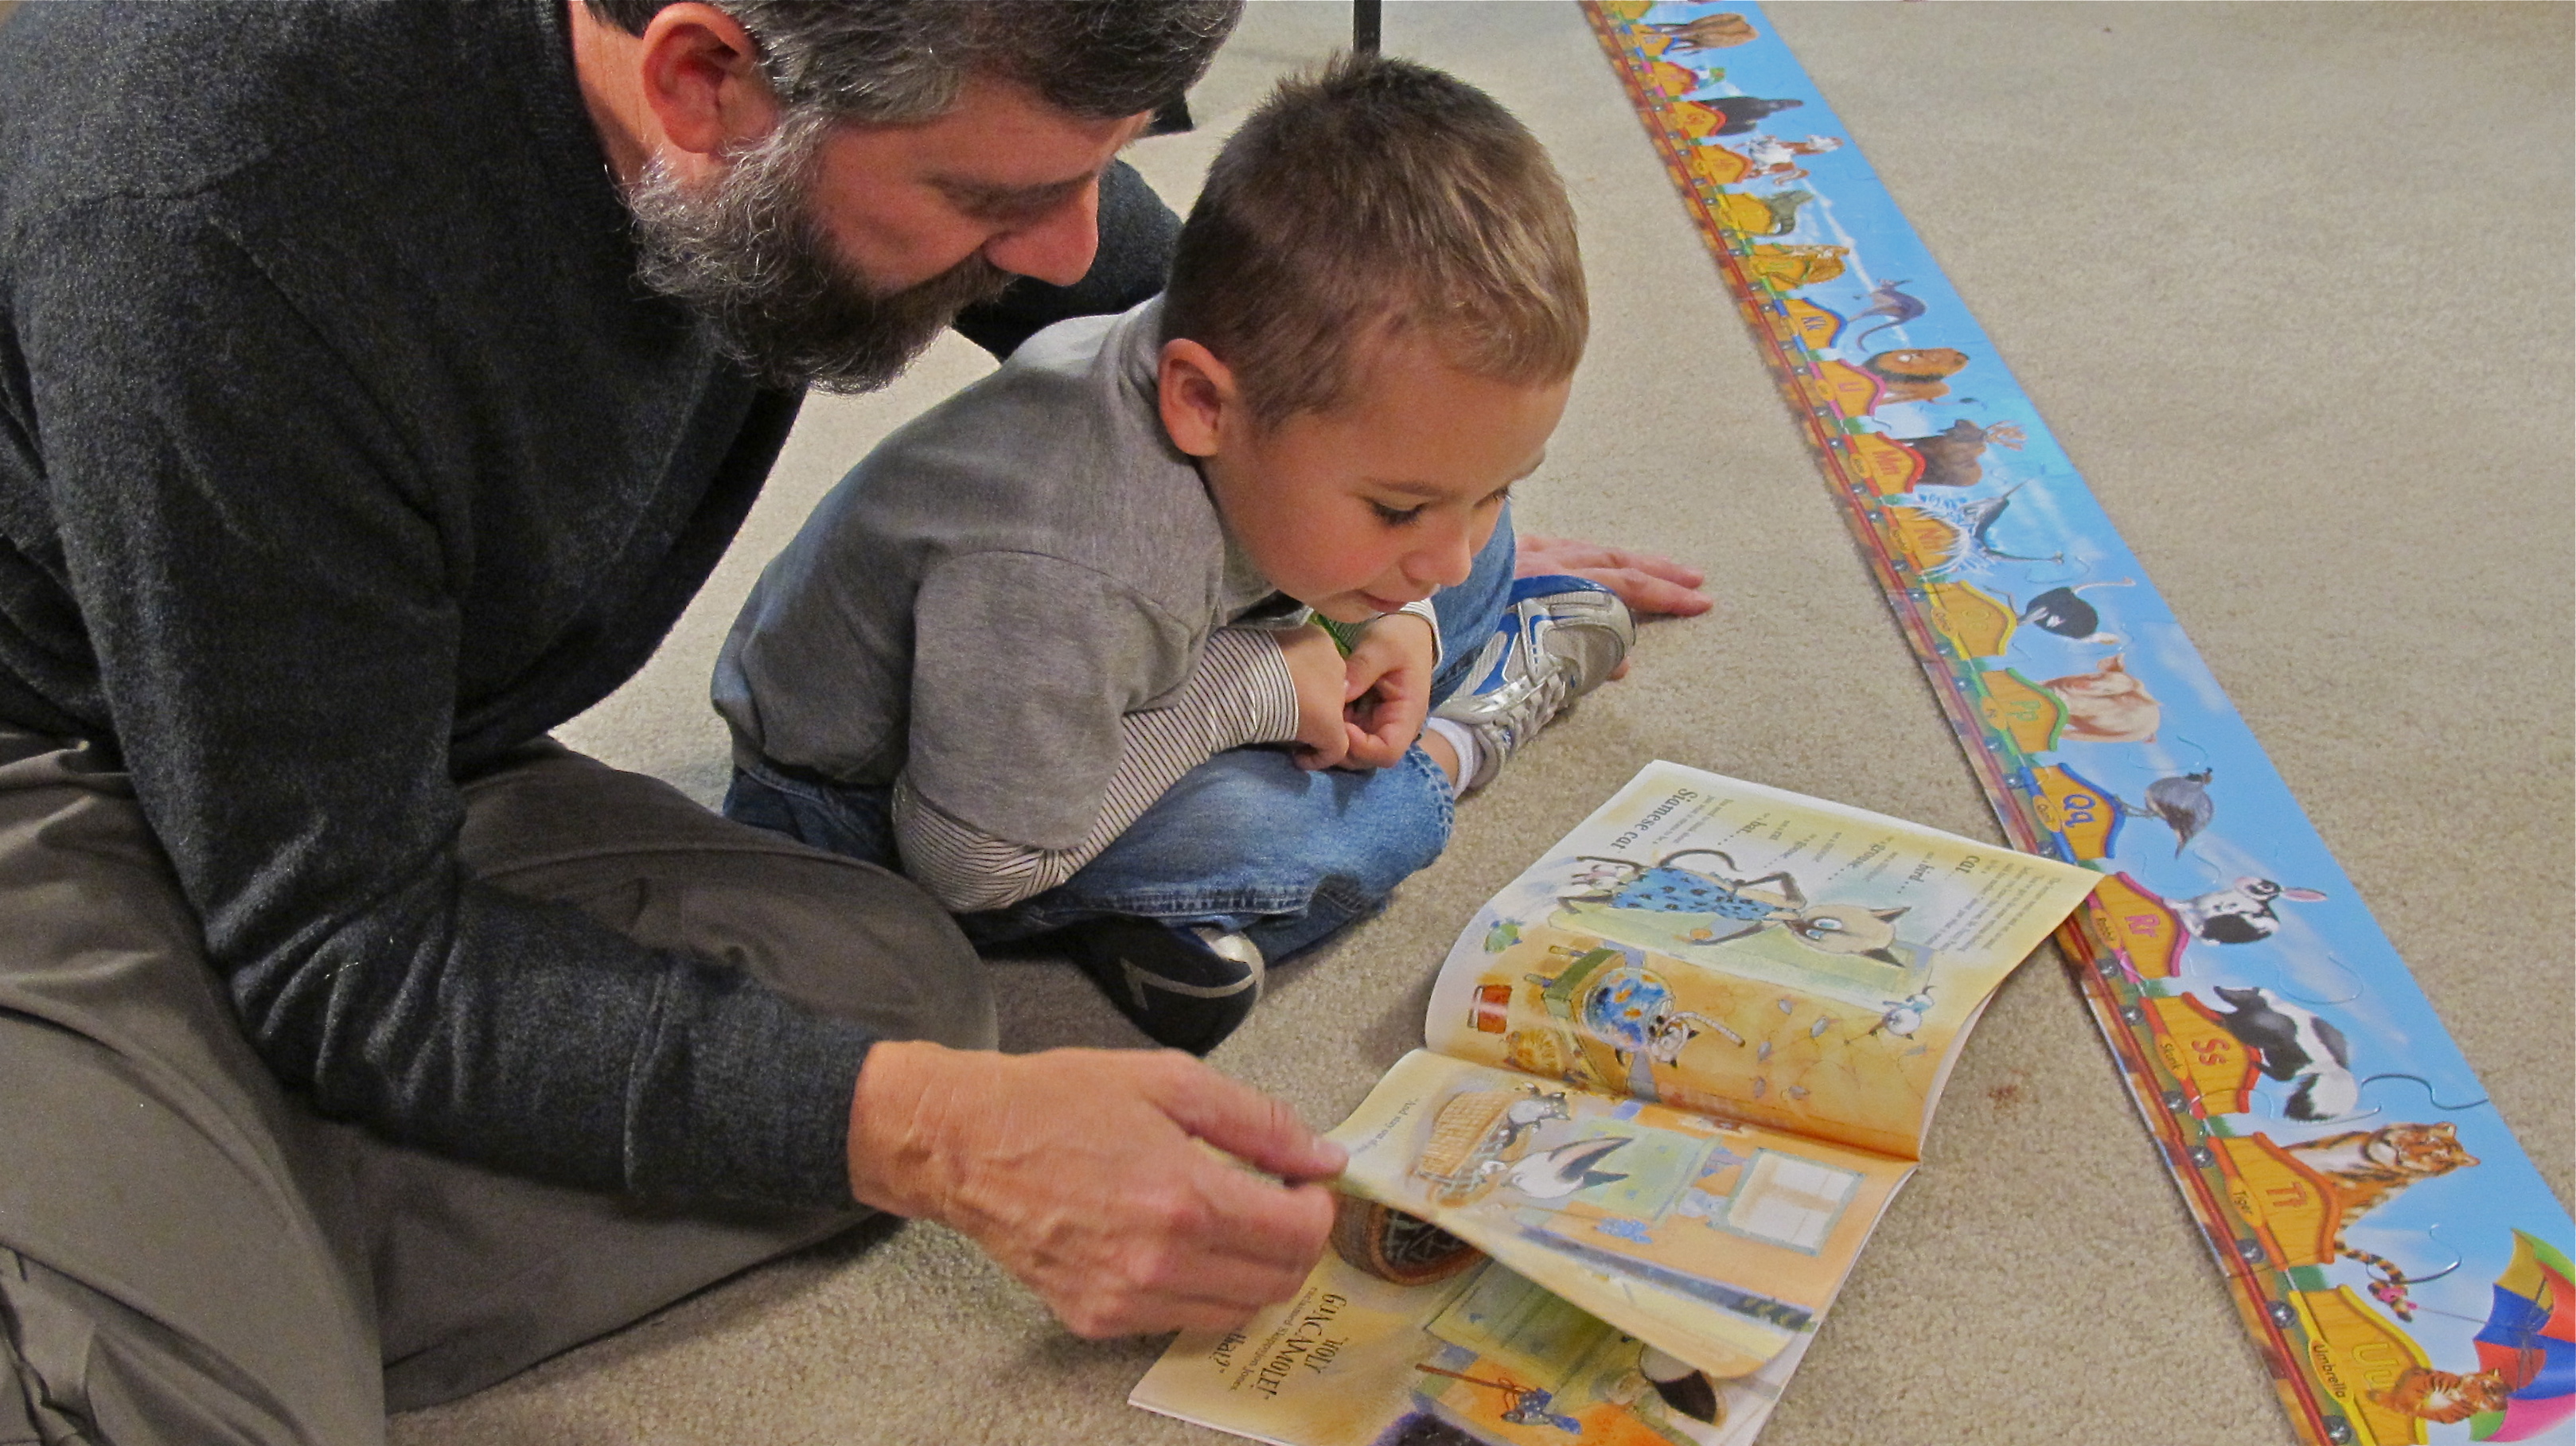 A READY! grandfather reads with his grandson.